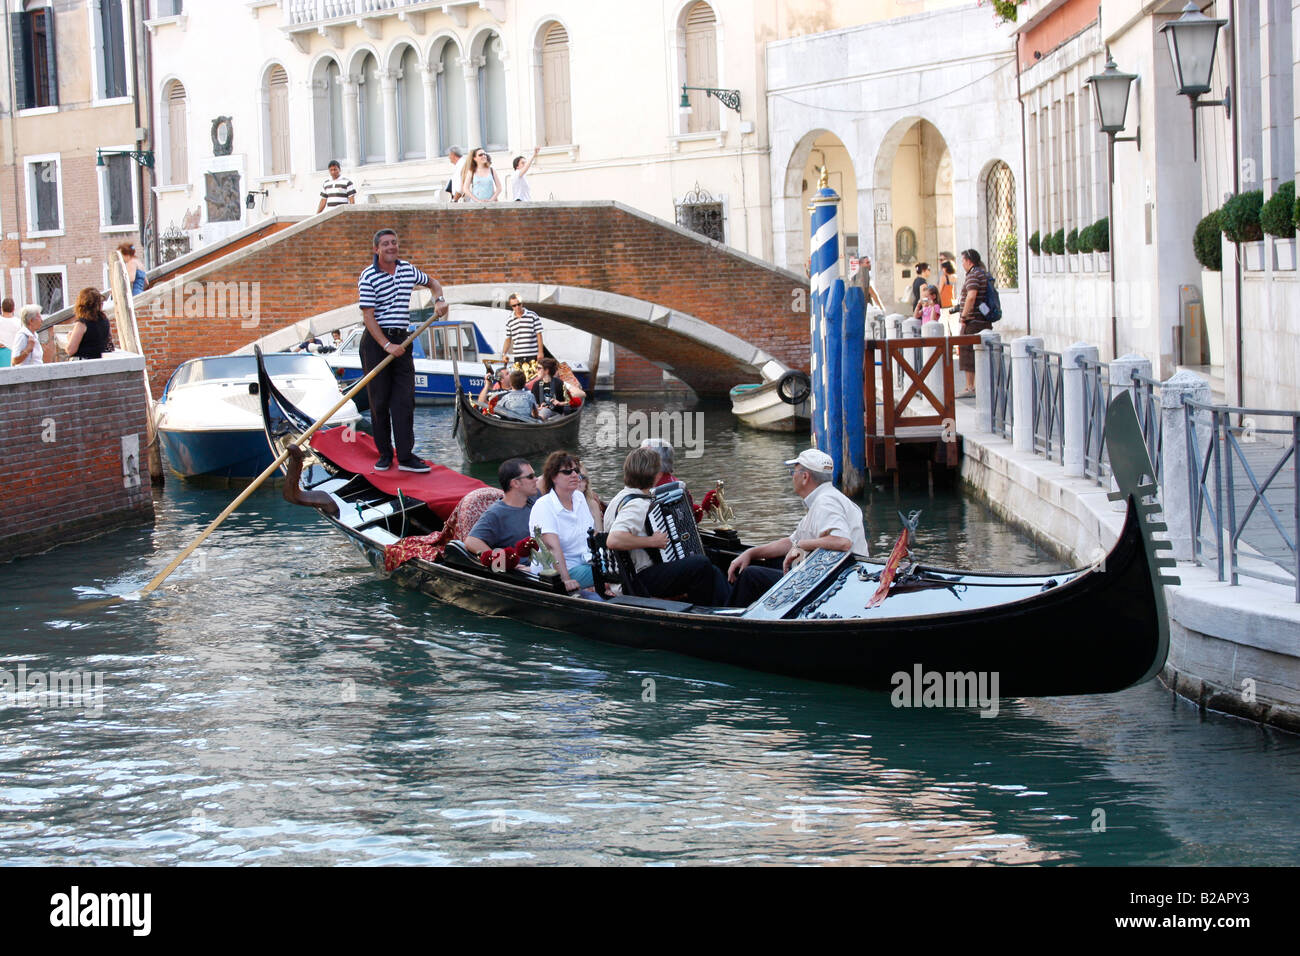 Tourists enjoying an evening Gondola ride along the Venice canals listening to music from an accordion. Stock Photo